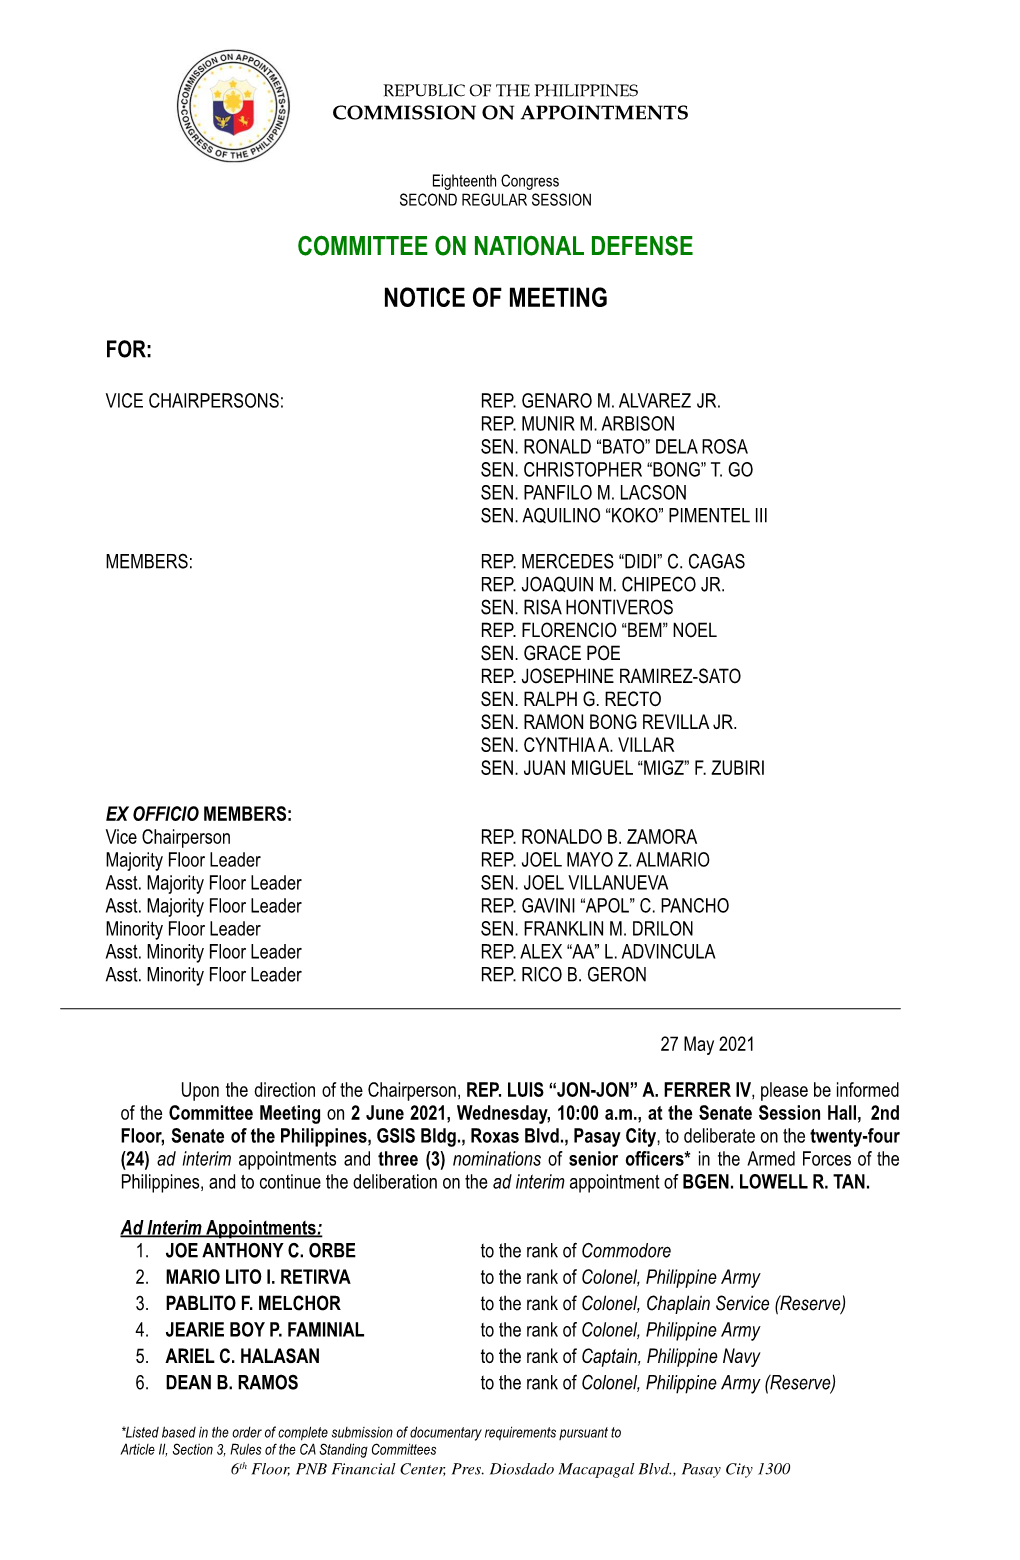 Committee on National Defense Notice of Meeting